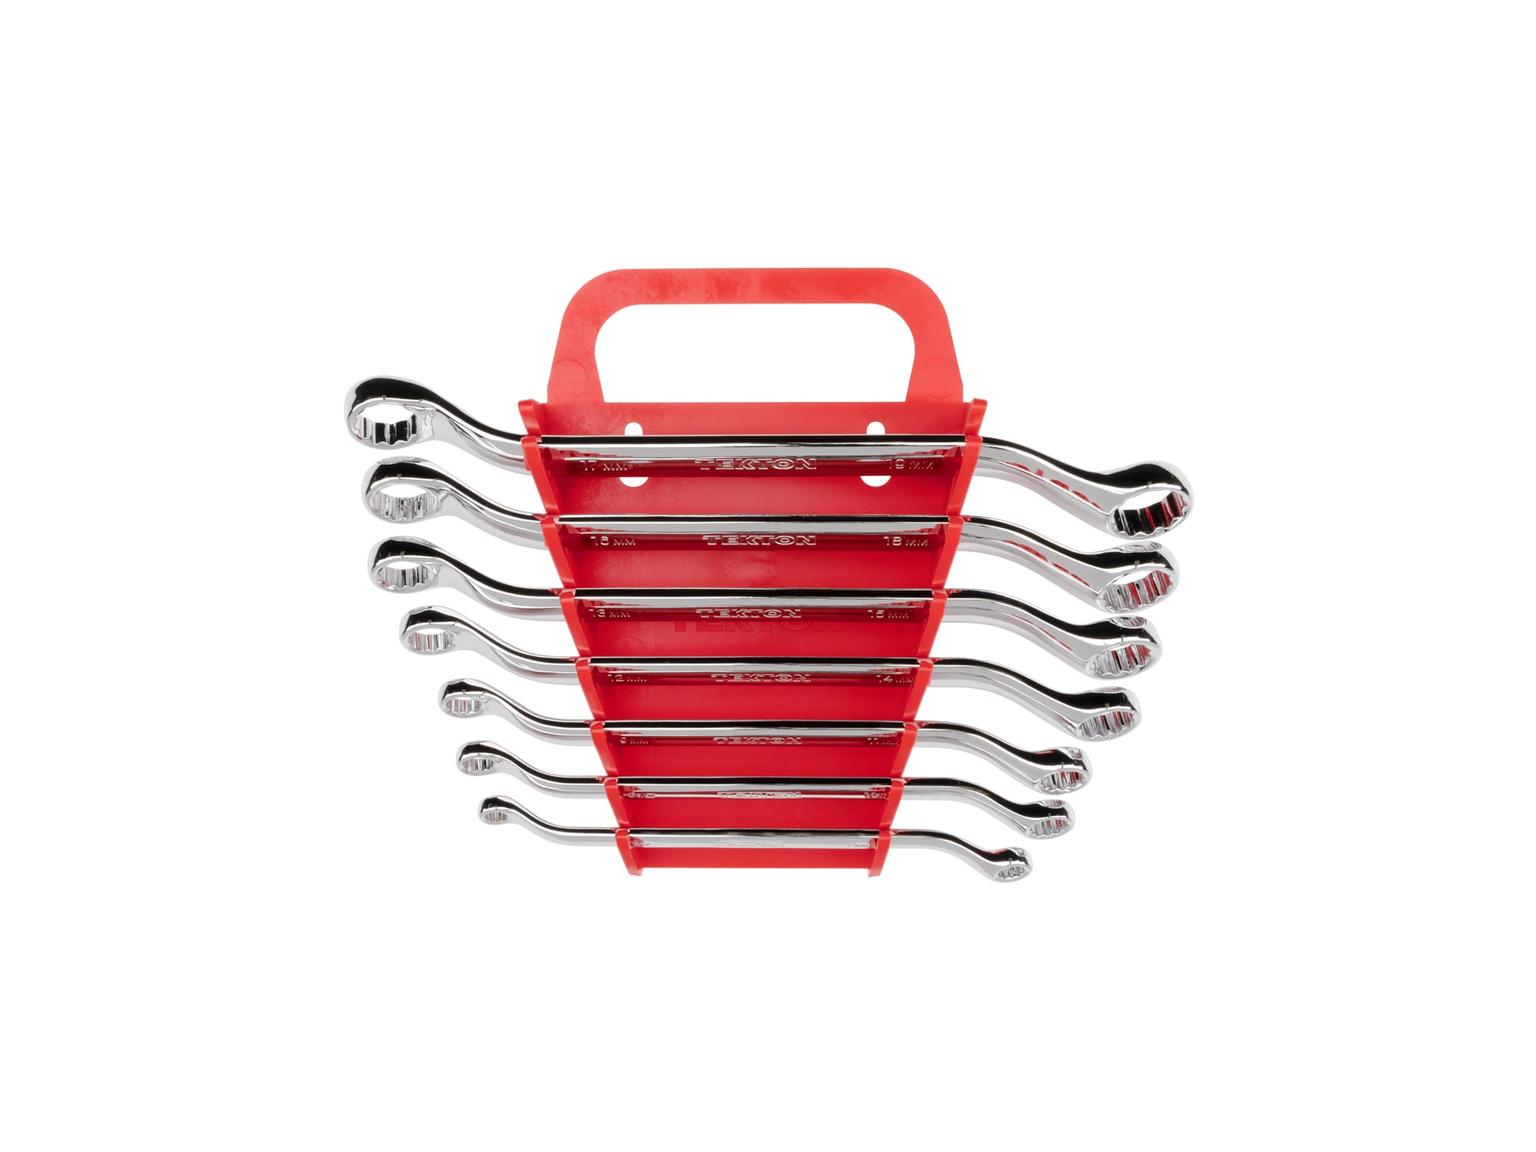 TEKTON WBE24407-T 45-Degree Offset Box End Wrench Set with Holder, 7-Piece (6-19 mm)